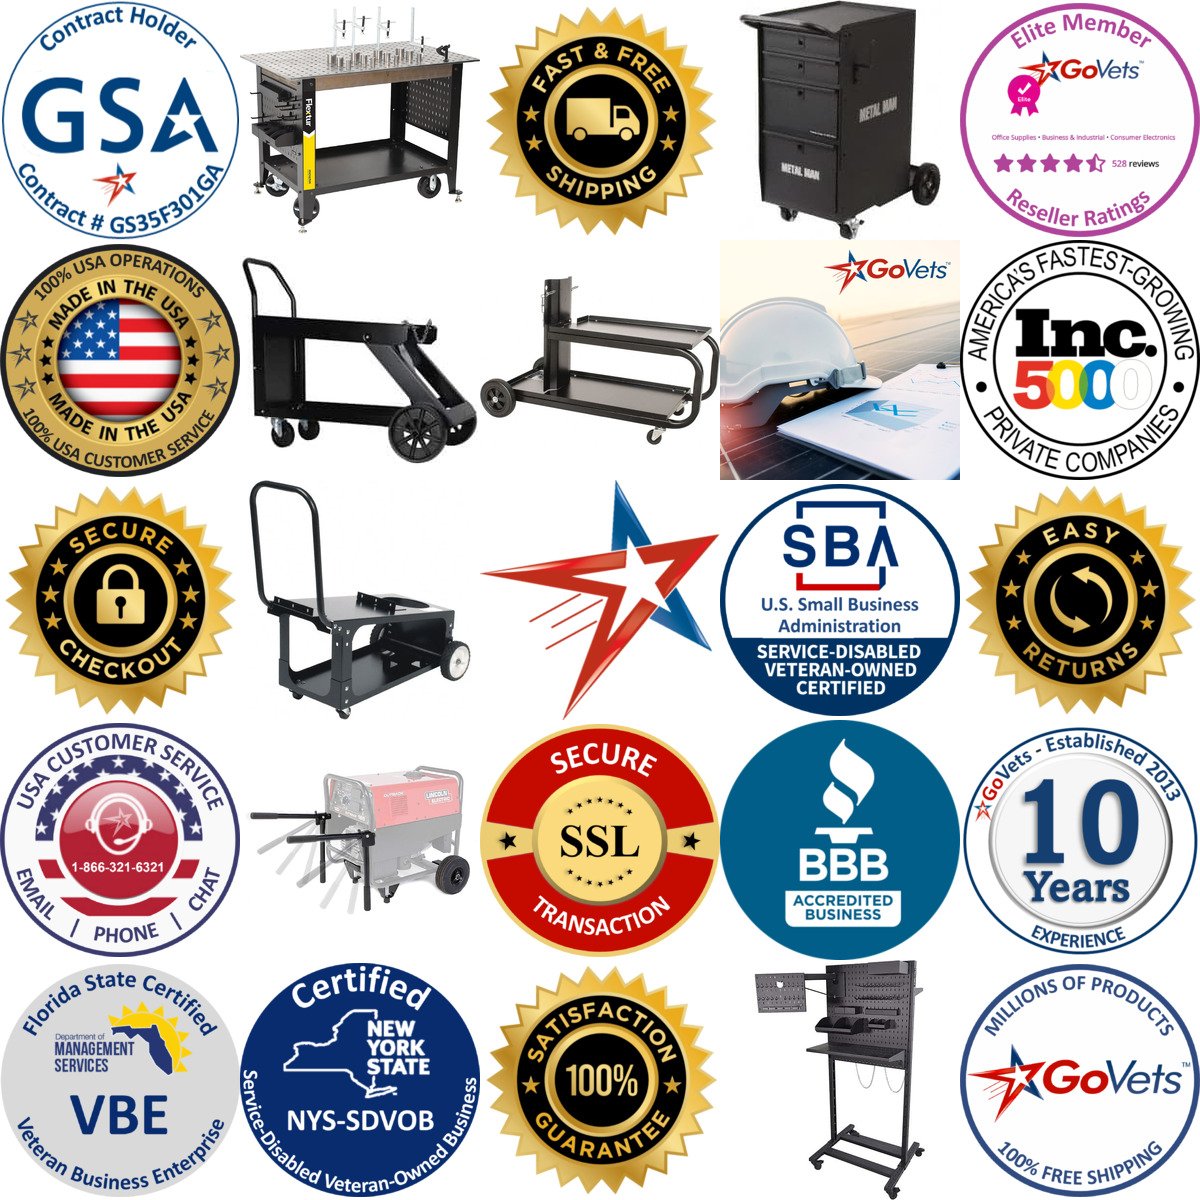 A selection of Welding Carts products on GoVets